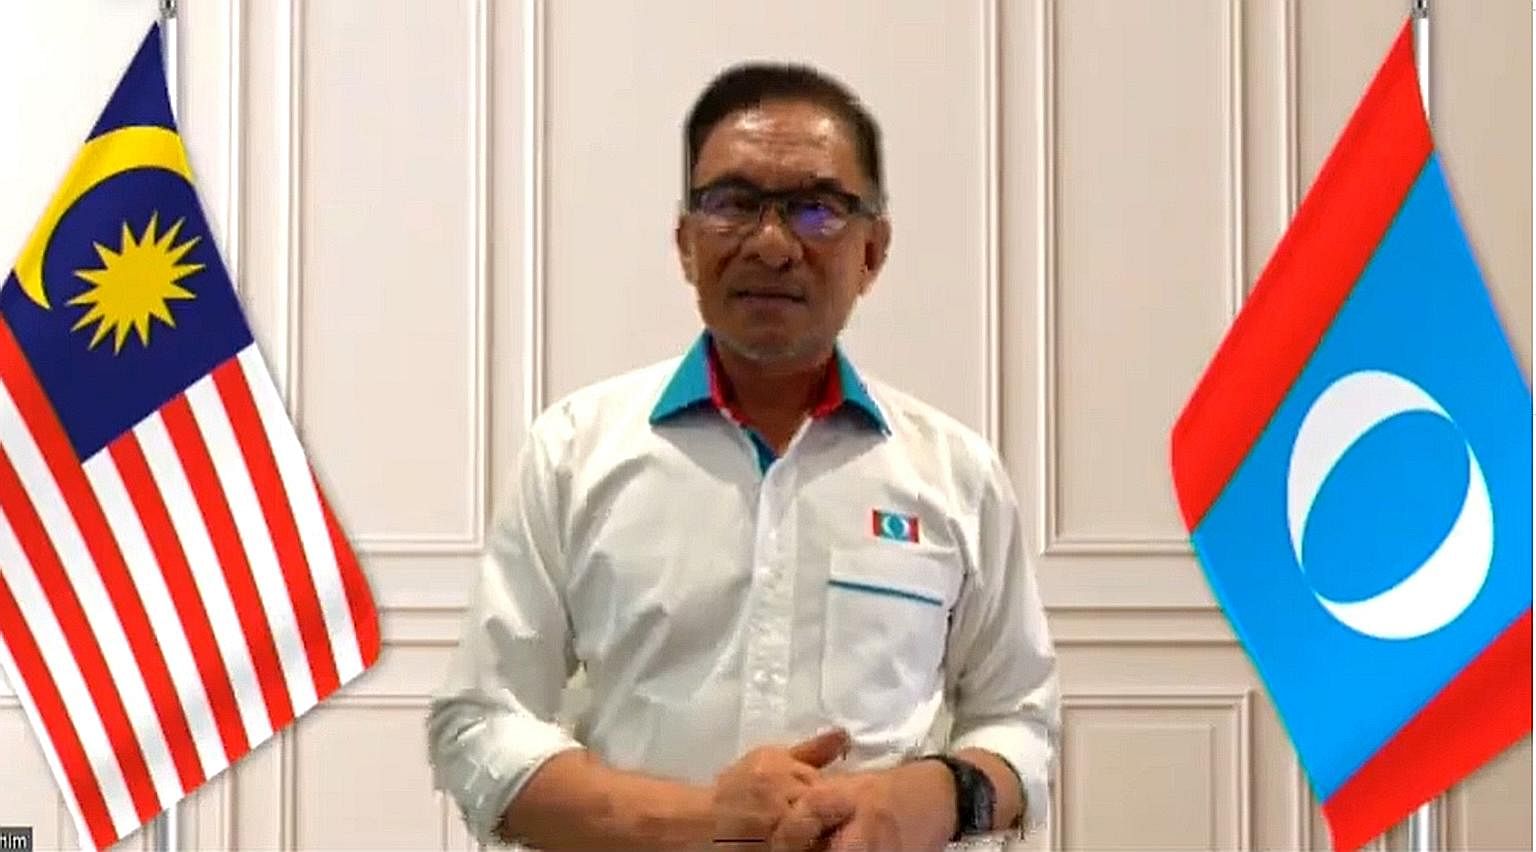 Mr Anwar Ibrahim criticising the government's handling of the Covid-19 crisis, in a special online address yesterday after the PKR virtual congress was last Friday blocked by the authorities.